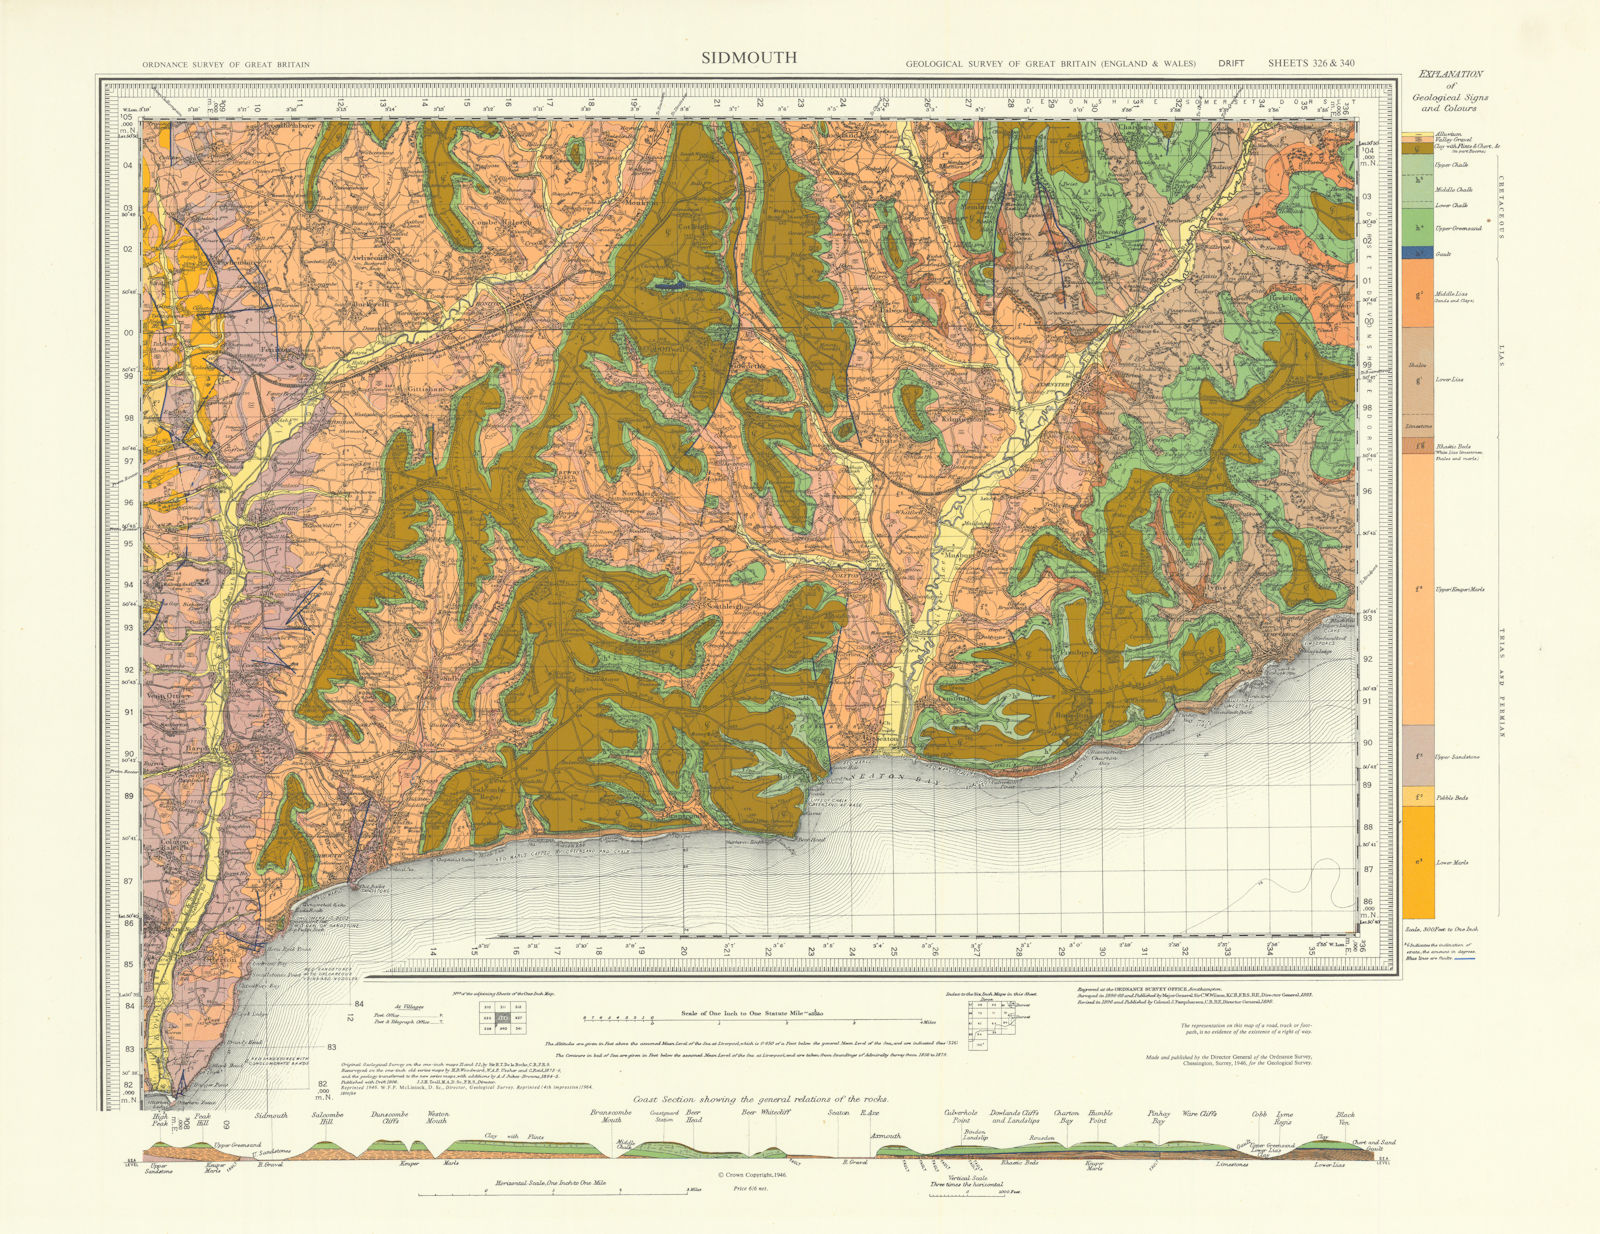 Associate Product Sidmouth geological survey sheet 326 and 340. East Devon Jurassic Coast 1964 map